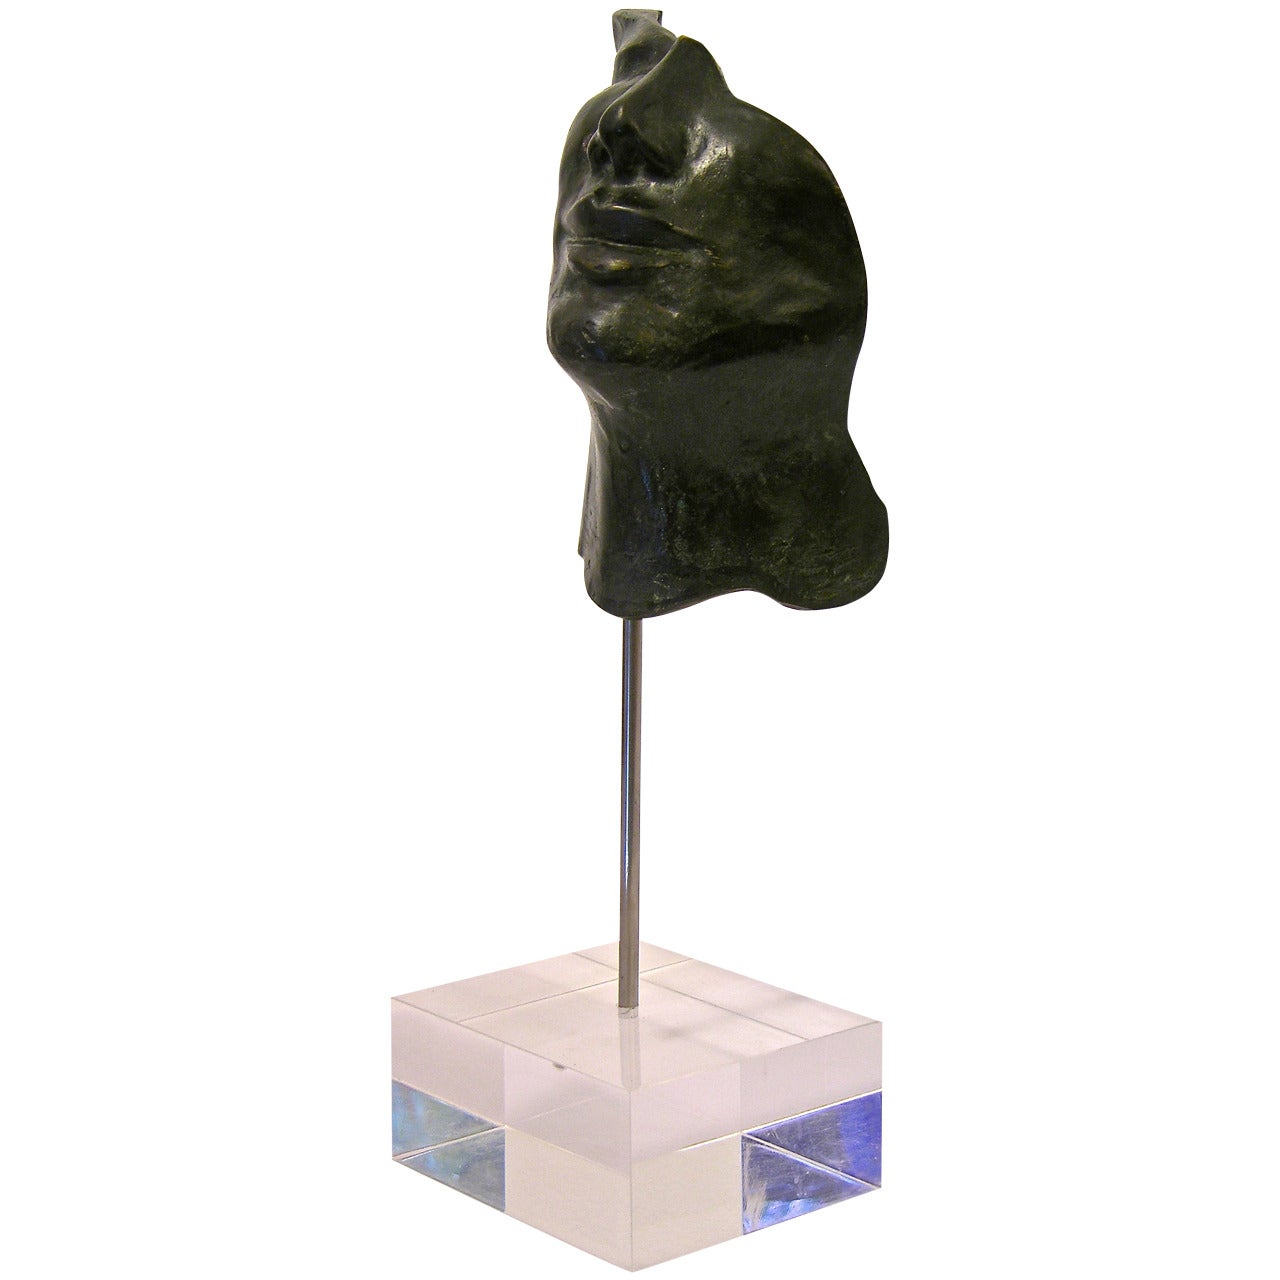 Hollow Face, Italian Black Bronze Sculpture on Lucite Base by Ginestroni